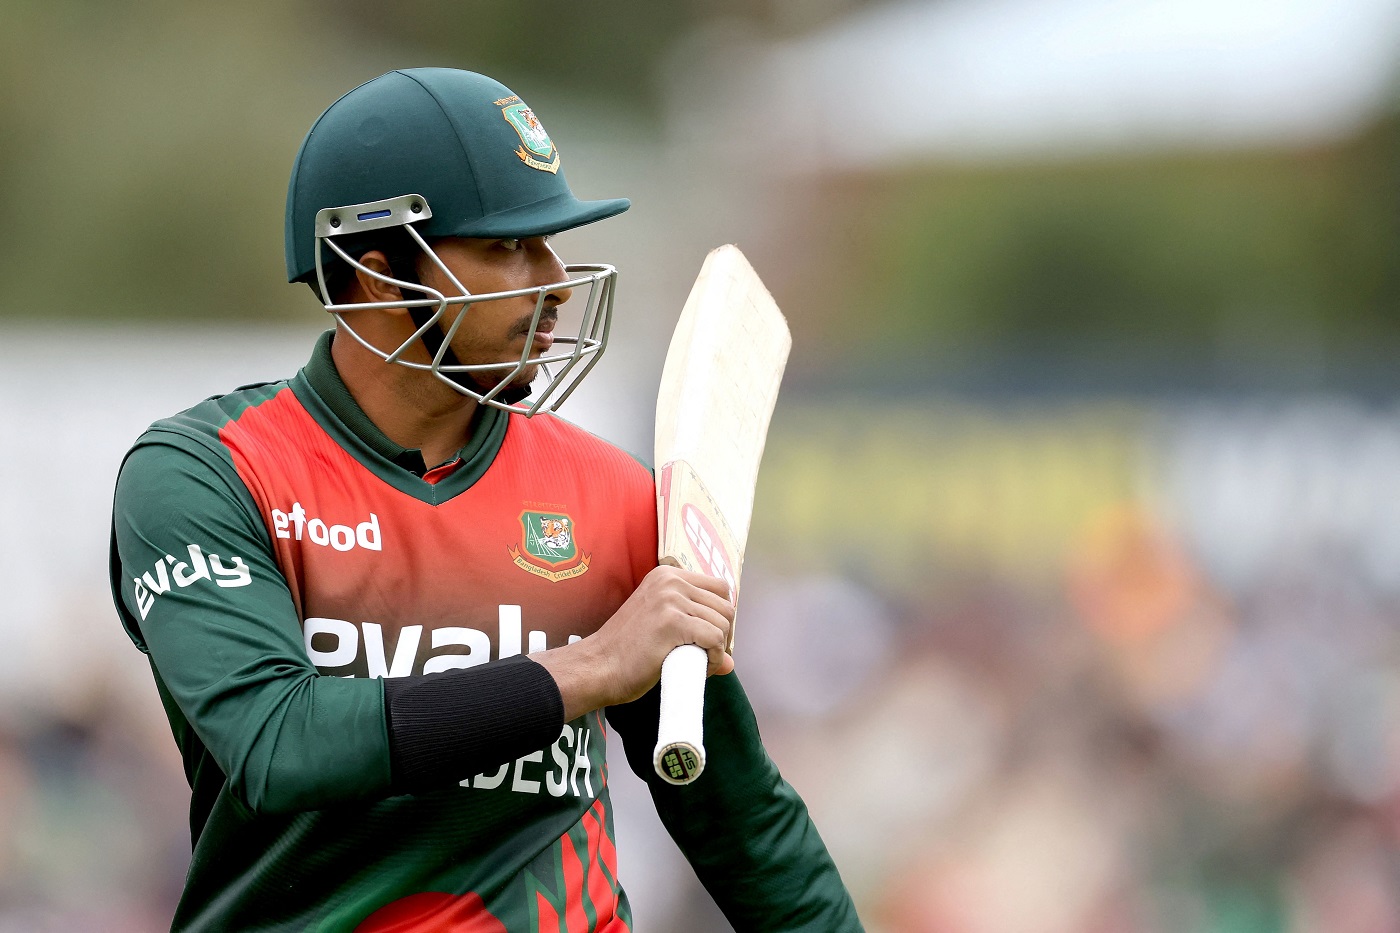  reports in sections of local media of six positive cases in the Khulna Tigers side, including that of Soumya Sarkar, and 12 COVID-19 positive cases overall among the BCB's employees over the last four or five days.